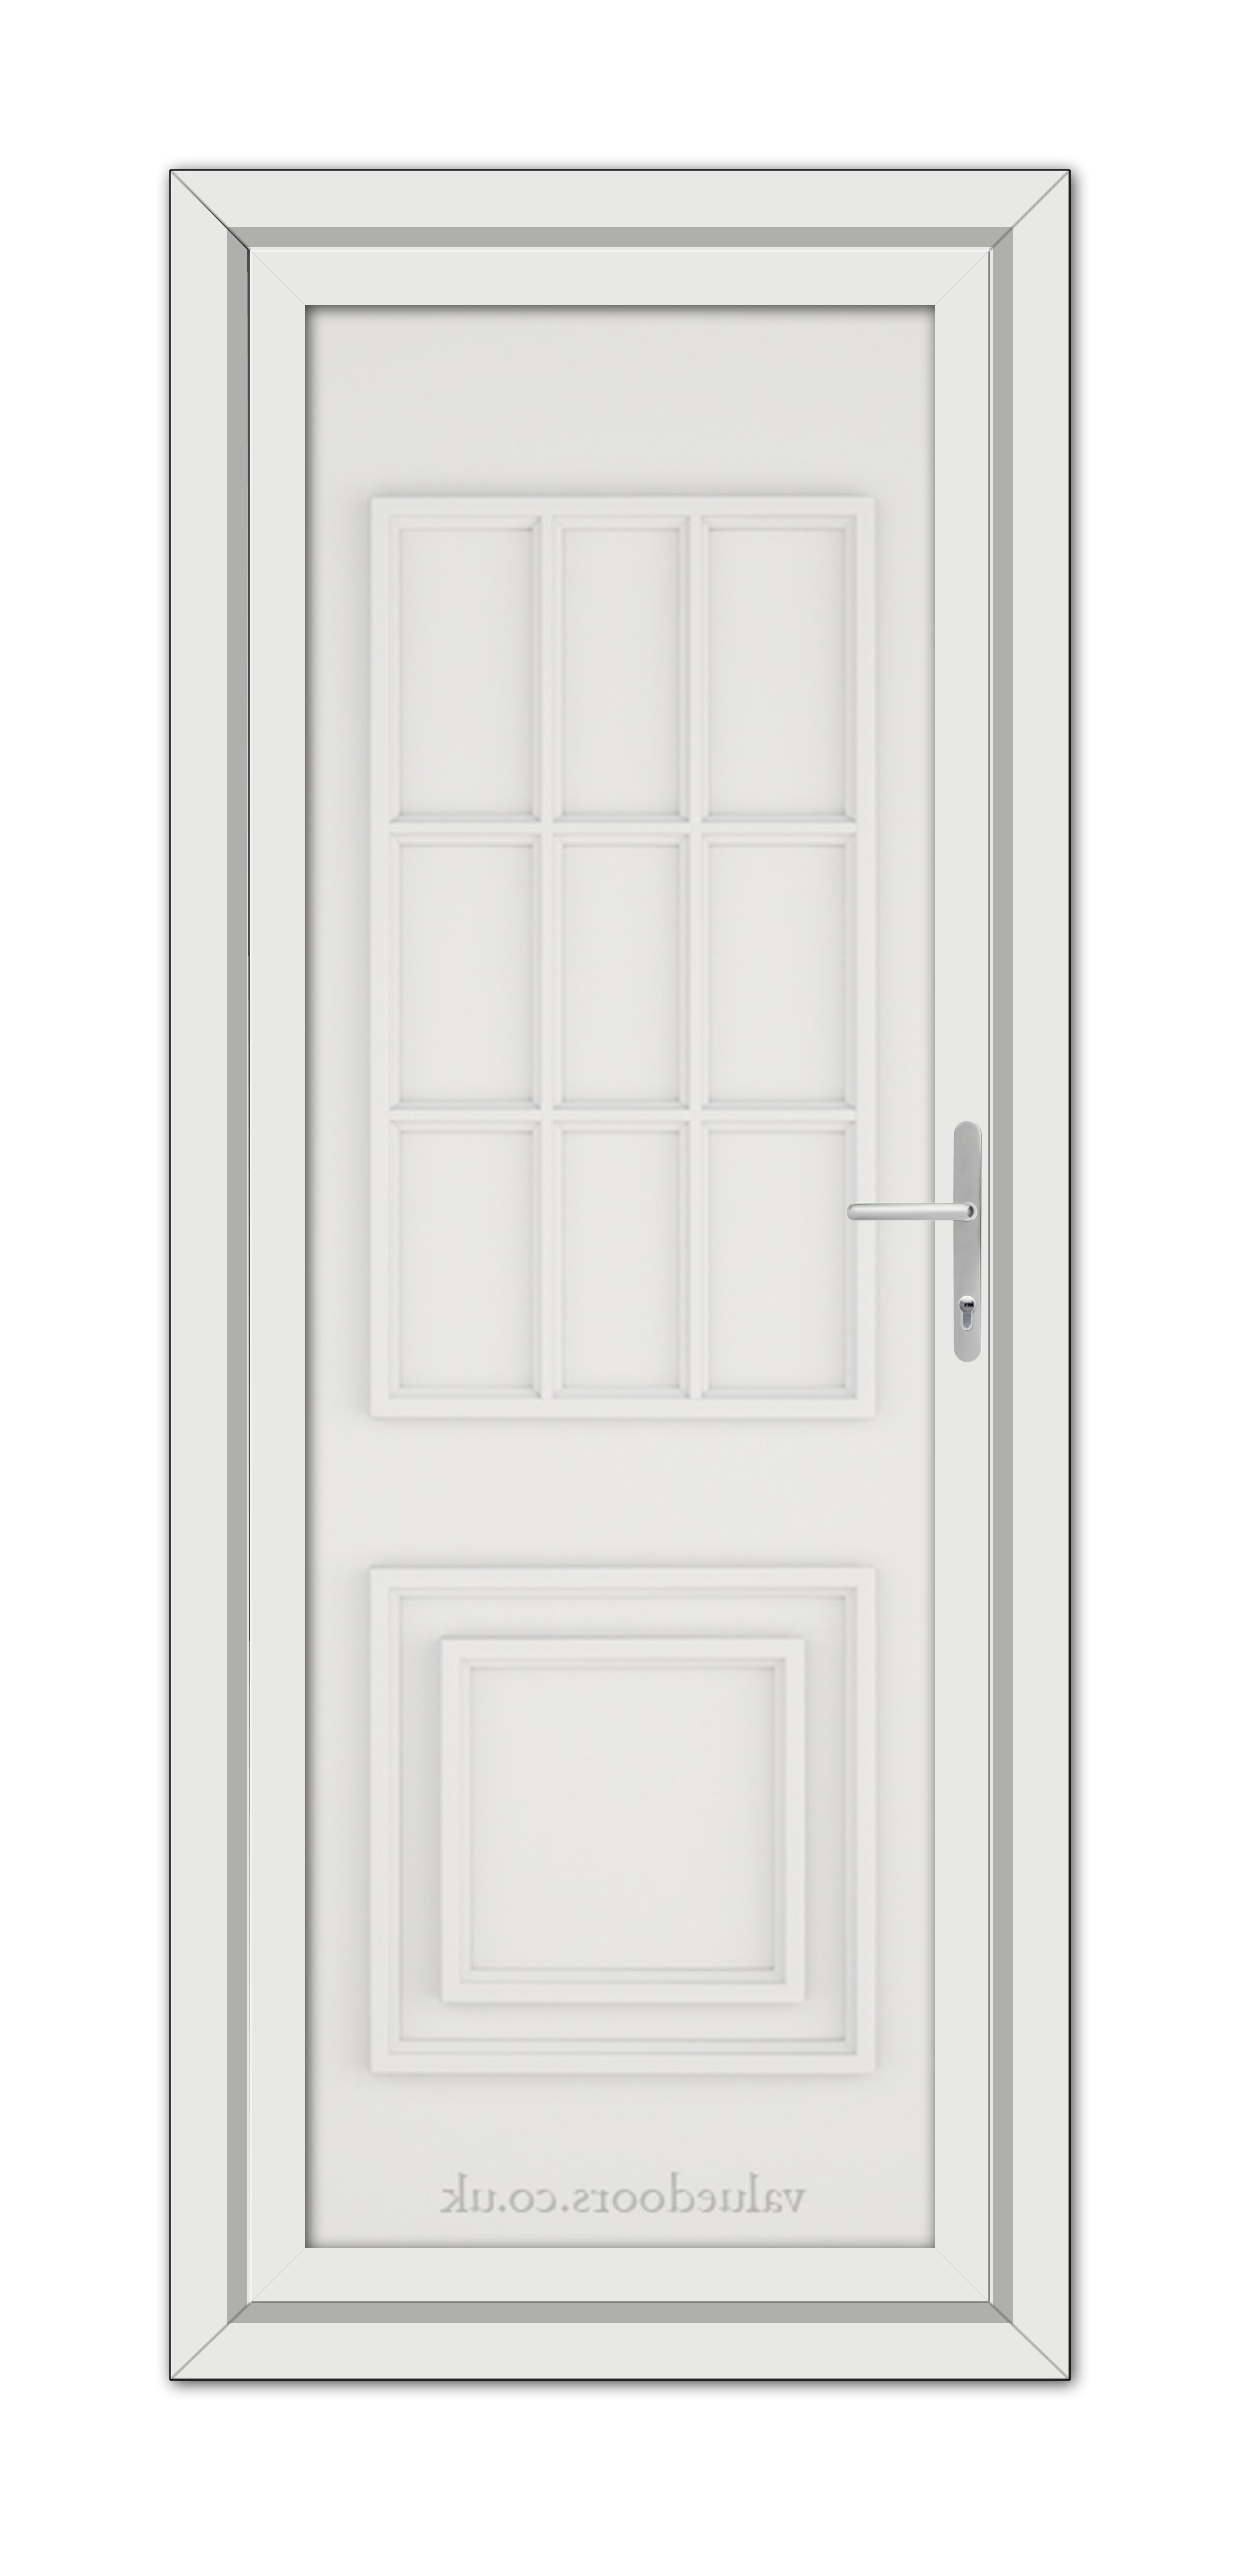 Closed white Cambridge One Solid uPVC door with a silver handle and multiple rectangular panels, encased in a frame, viewed from the front.